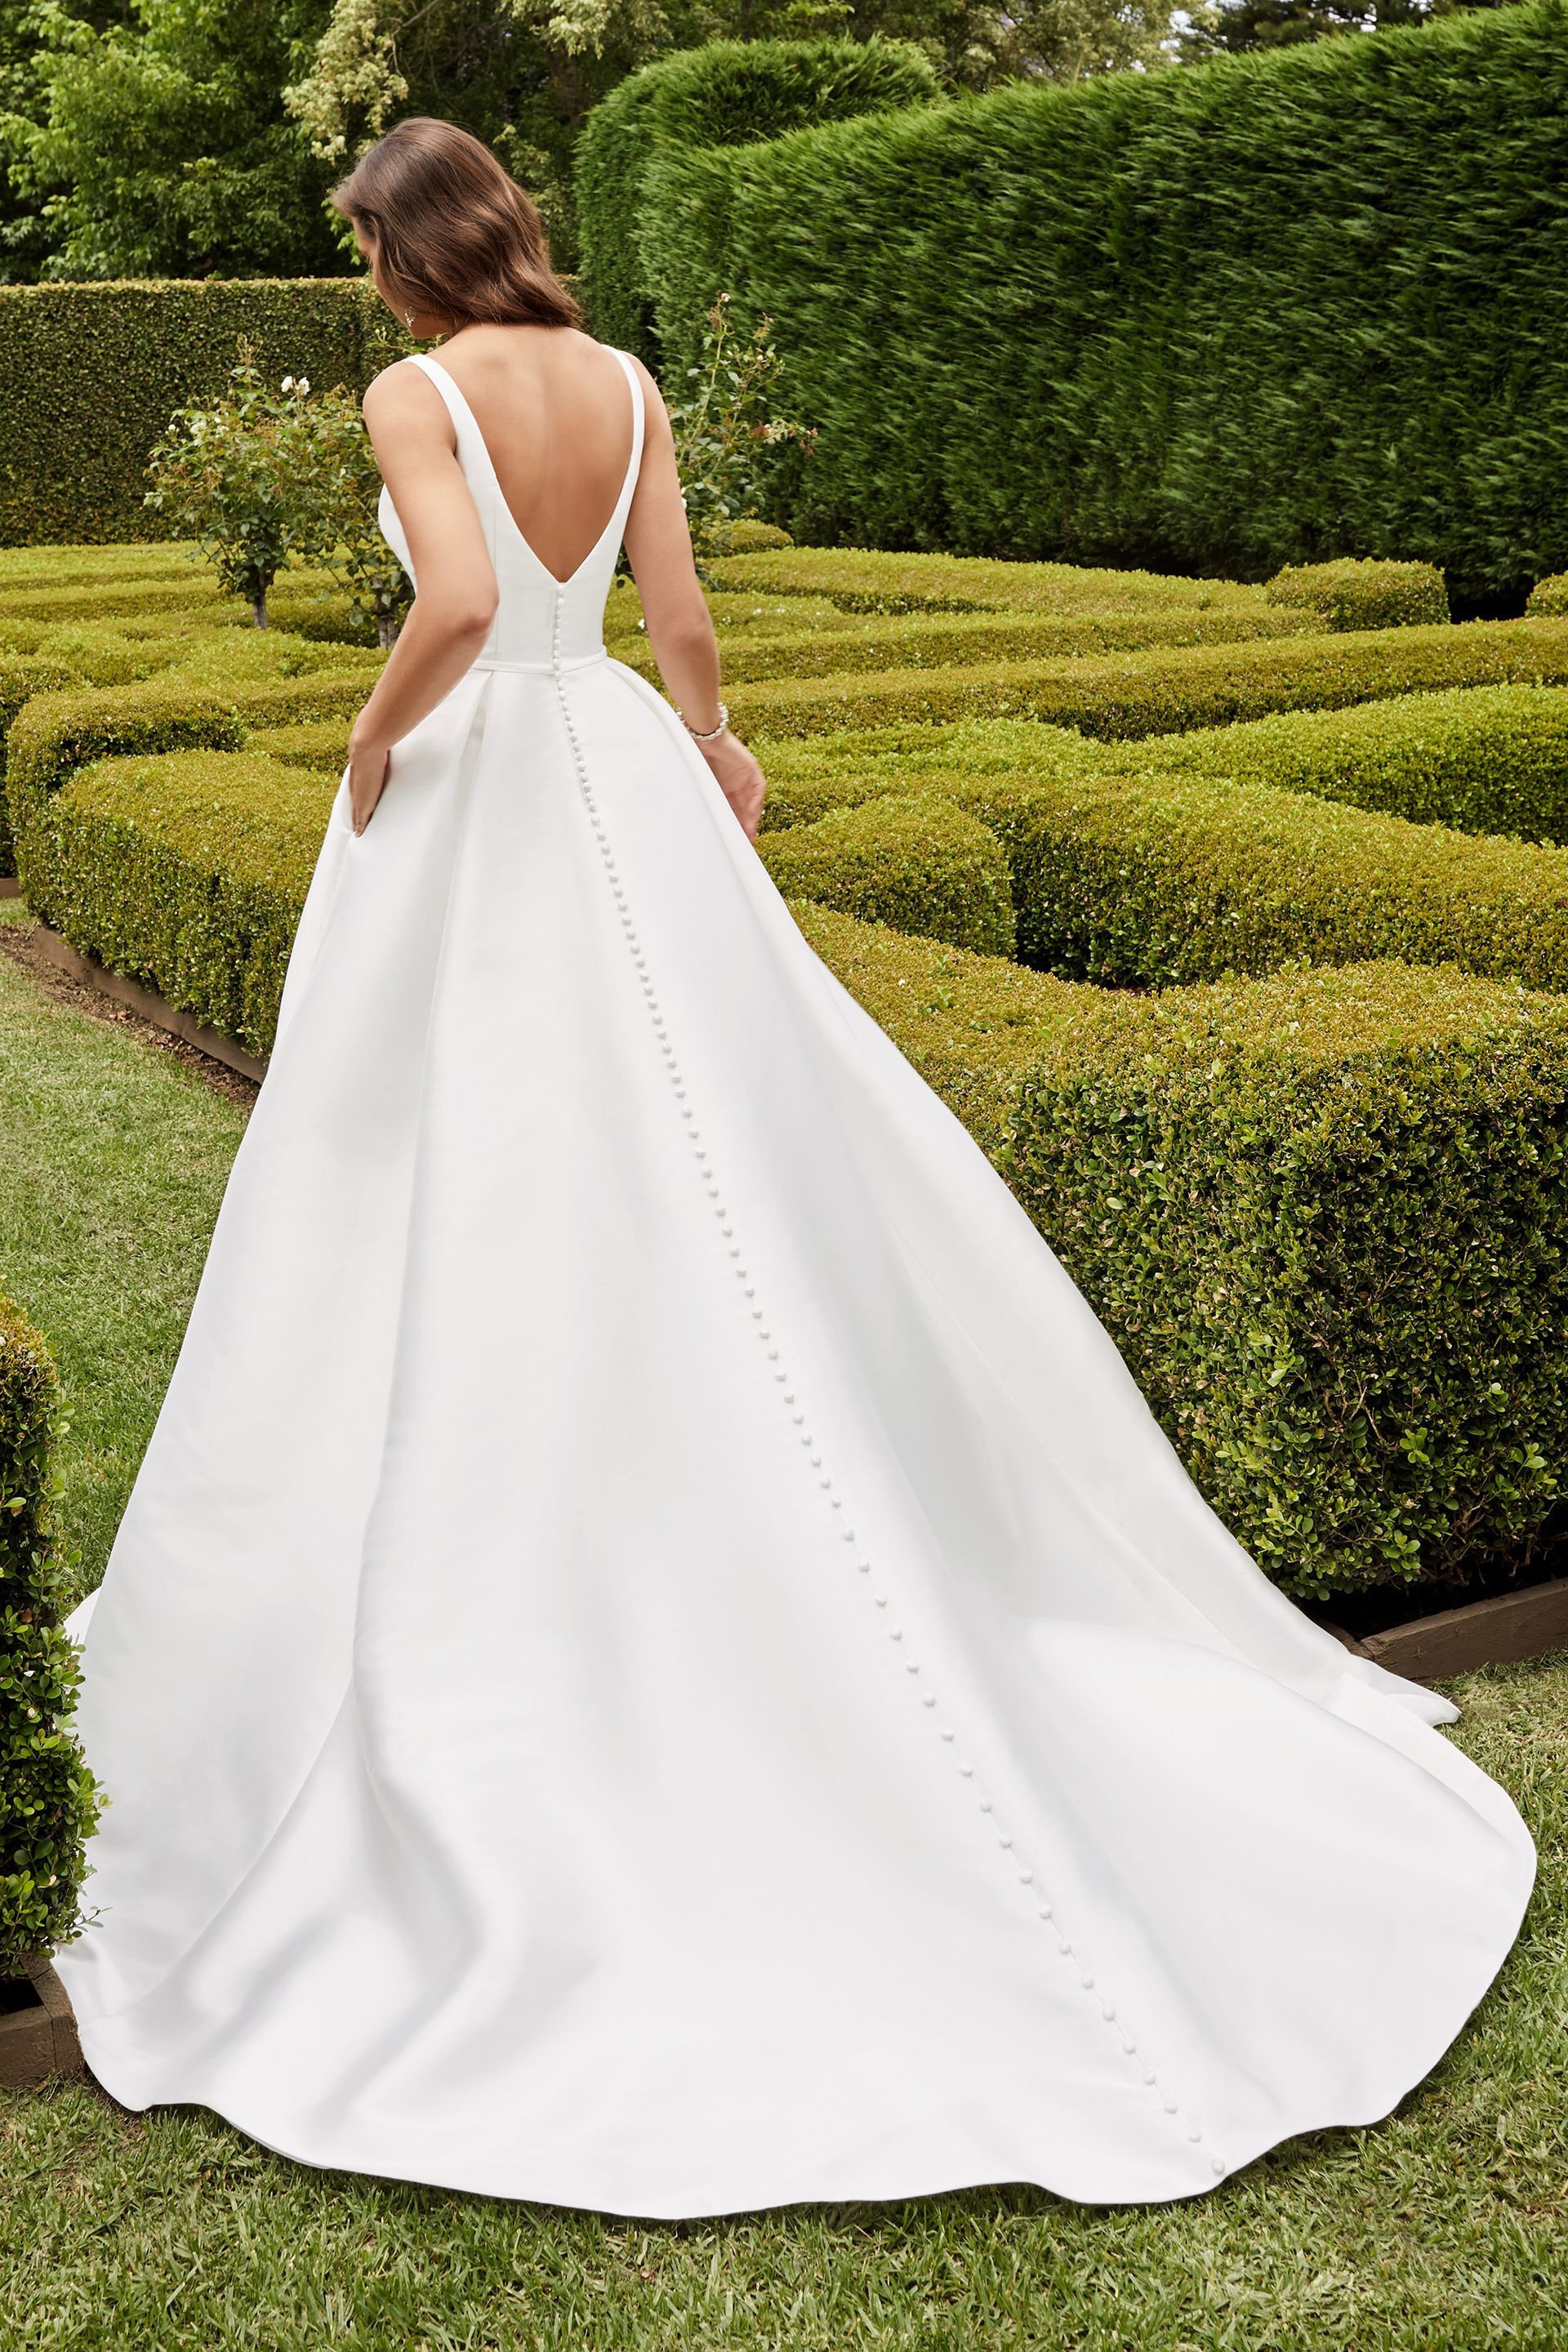 A woman in a white wedding dress is standing in a garden.